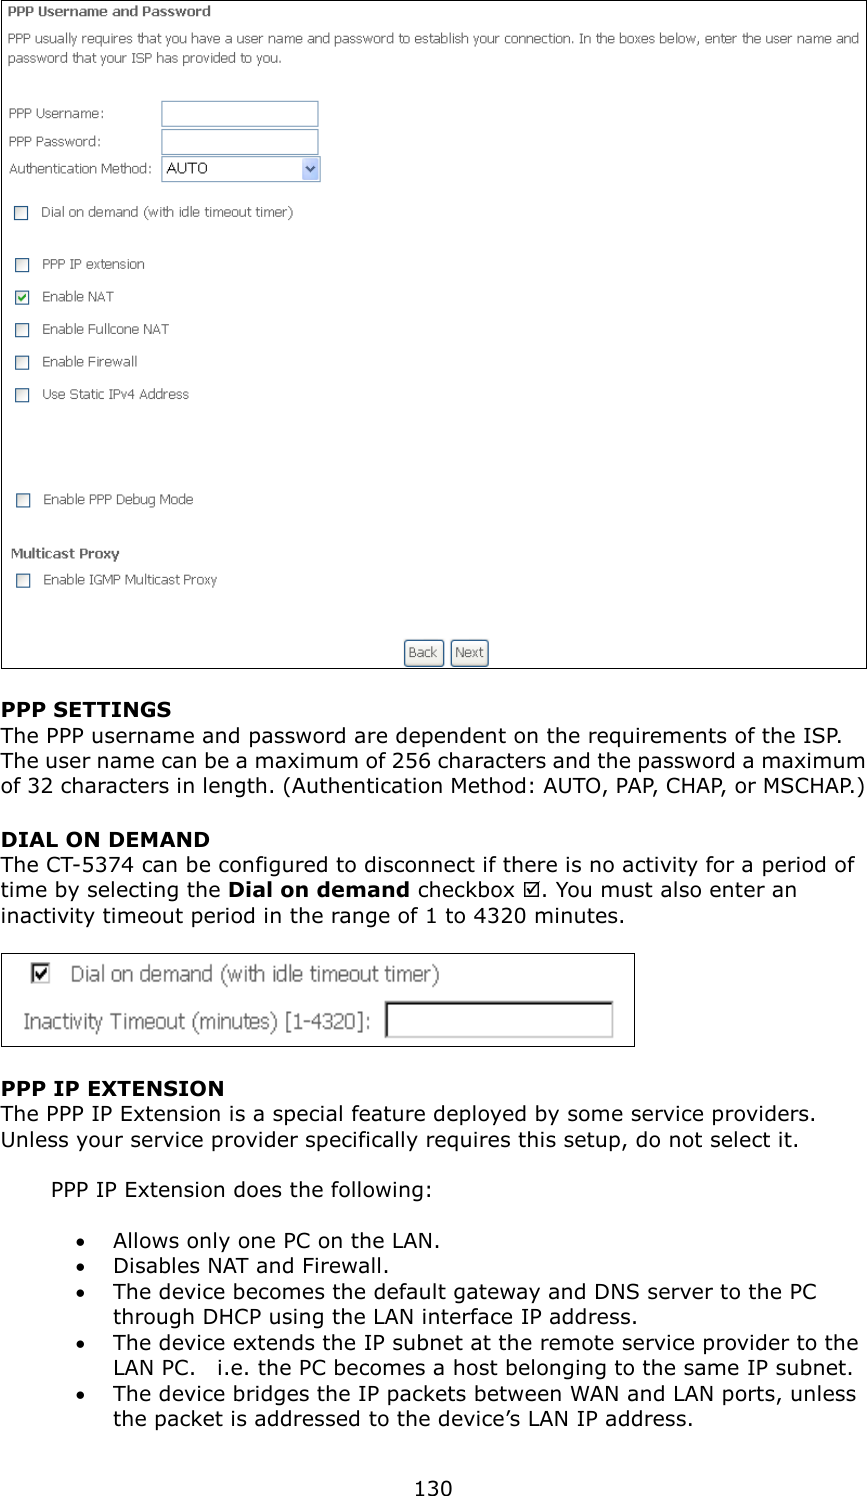   130  PPP SETTINGS The PPP username and password are dependent on the requirements of the ISP.   The user name can be a maximum of 256 characters and the password a maximum of 32 characters in length. (Authentication Method: AUTO, PAP, CHAP, or MSCHAP.) DIAL ON DEMAND The CT-5374 can be configured to disconnect if there is no activity for a period of time by selecting the Dial on demand checkbox . You must also enter an inactivity timeout period in the range of 1 to 4320 minutes.       PPP IP EXTENSION The PPP IP Extension is a special feature deployed by some service providers.   Unless your service provider specifically requires this setup, do not select it.    PPP IP Extension does the following:  •  Allows only one PC on the LAN. •  Disables NAT and Firewall. •  The device becomes the default gateway and DNS server to the PC through DHCP using the LAN interface IP address. •  The device extends the IP subnet at the remote service provider to the LAN PC.    i.e. the PC becomes a host belonging to the same IP subnet. •  The device bridges the IP packets between WAN and LAN ports, unless the packet is addressed to the device’s LAN IP address. 